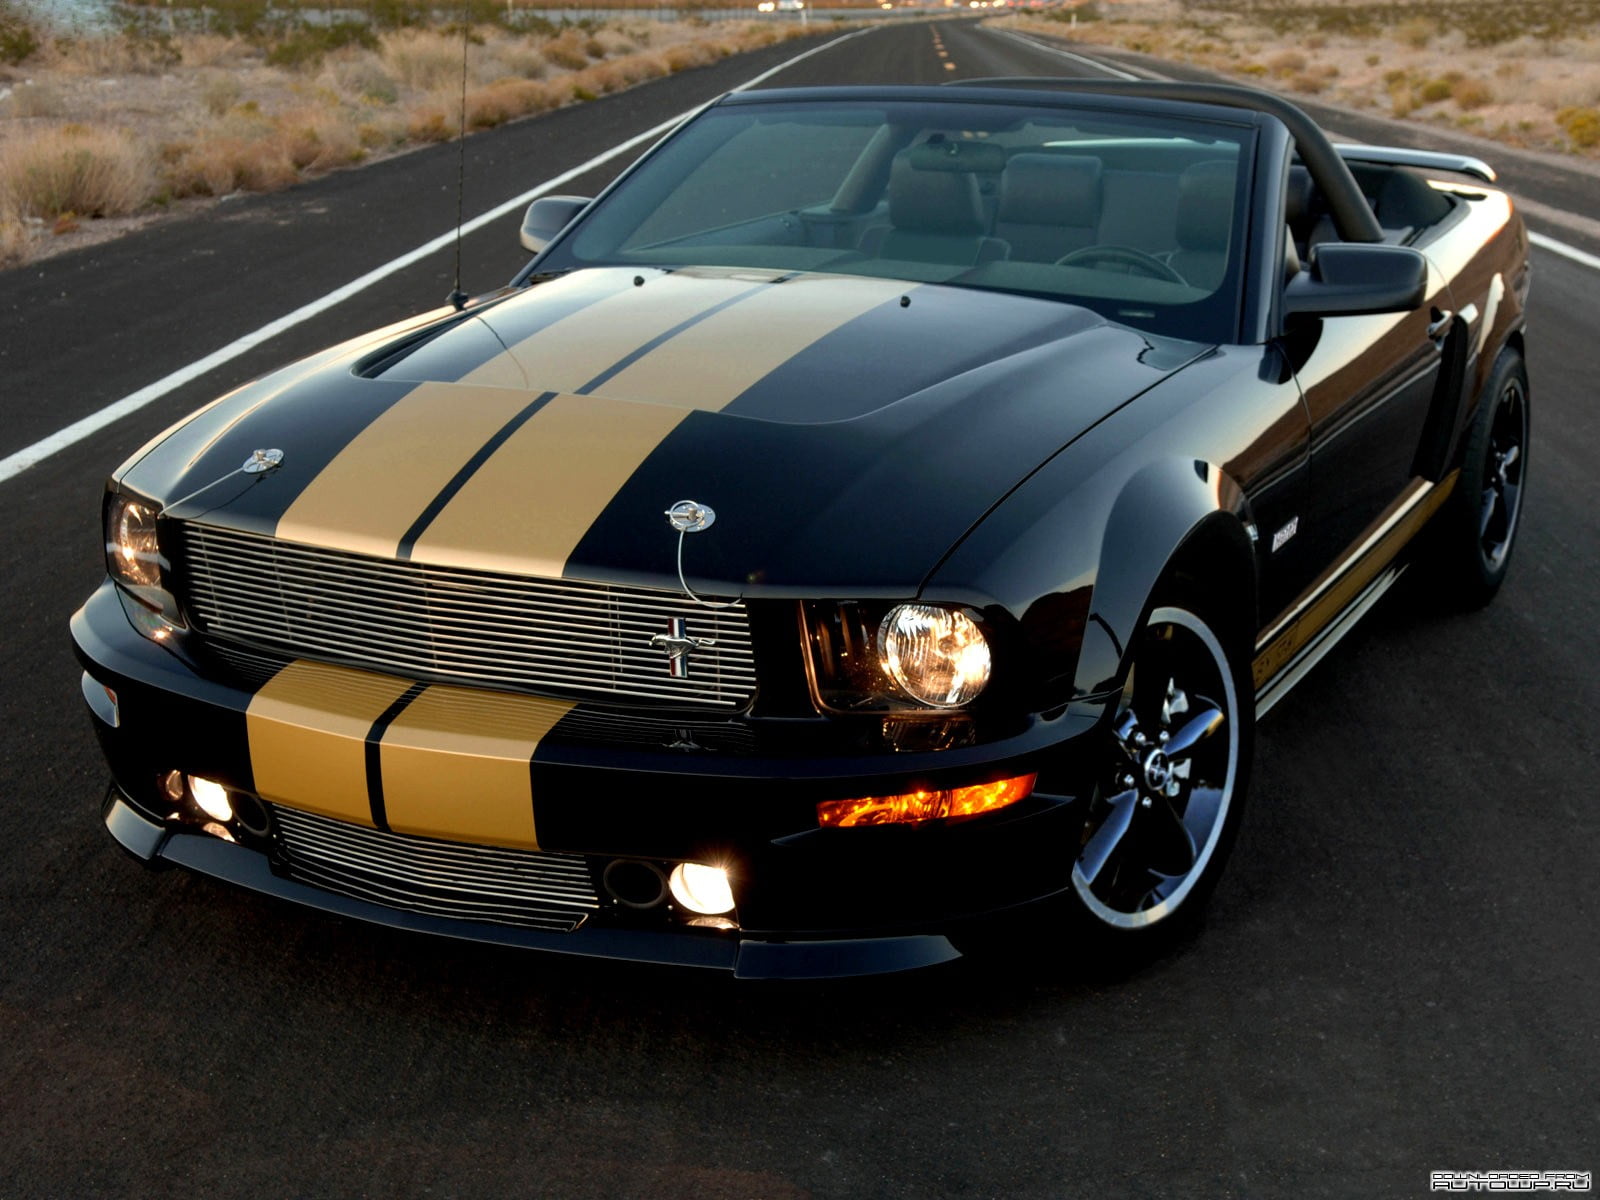 Black And Brown Ford Mustang Convertible Coupe Car Shelby Gt500 Roadster 2010 Hd Wallpaper Wallpaper Flare